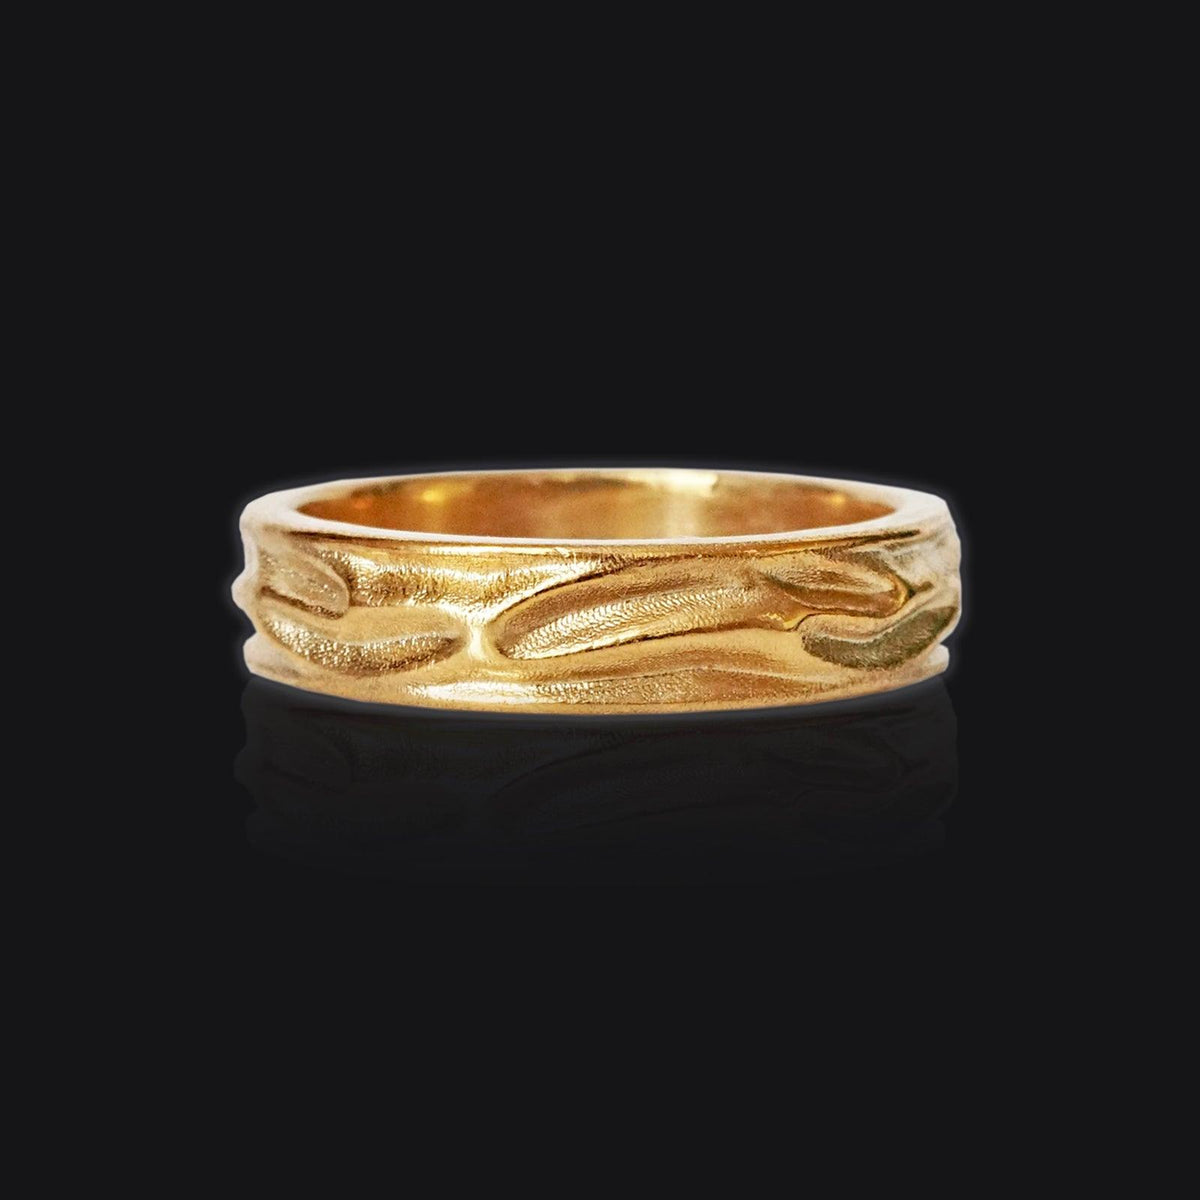 Liquid Ring in Sterling Silver and 14K Gold, 5mm